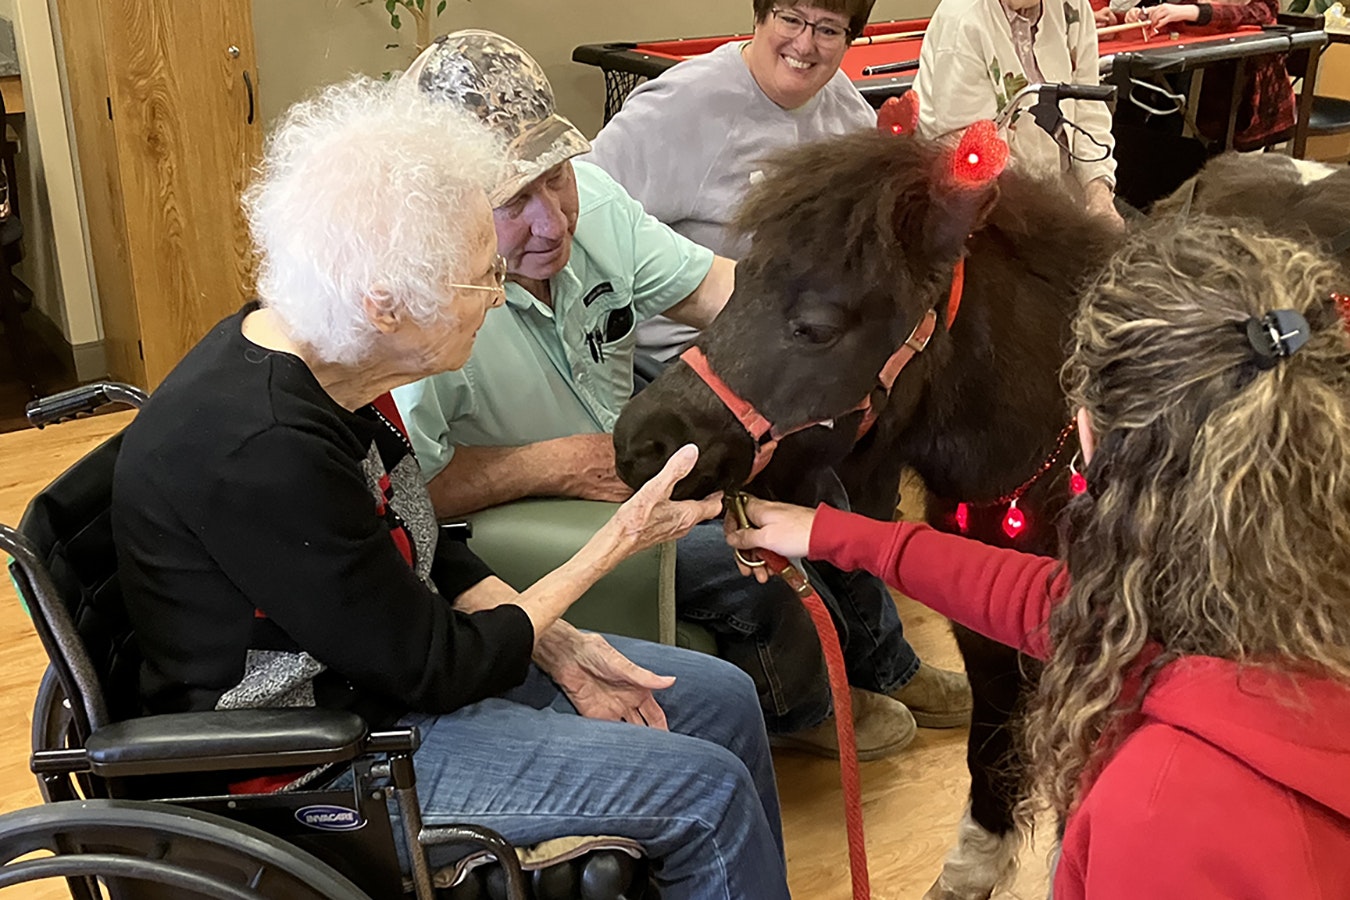 Amie Holt Care Center resident Beverly Landrey joked that she was “born” on a horse. The horse lover enjoyed getting some one-on-one time with Chip on Monday.